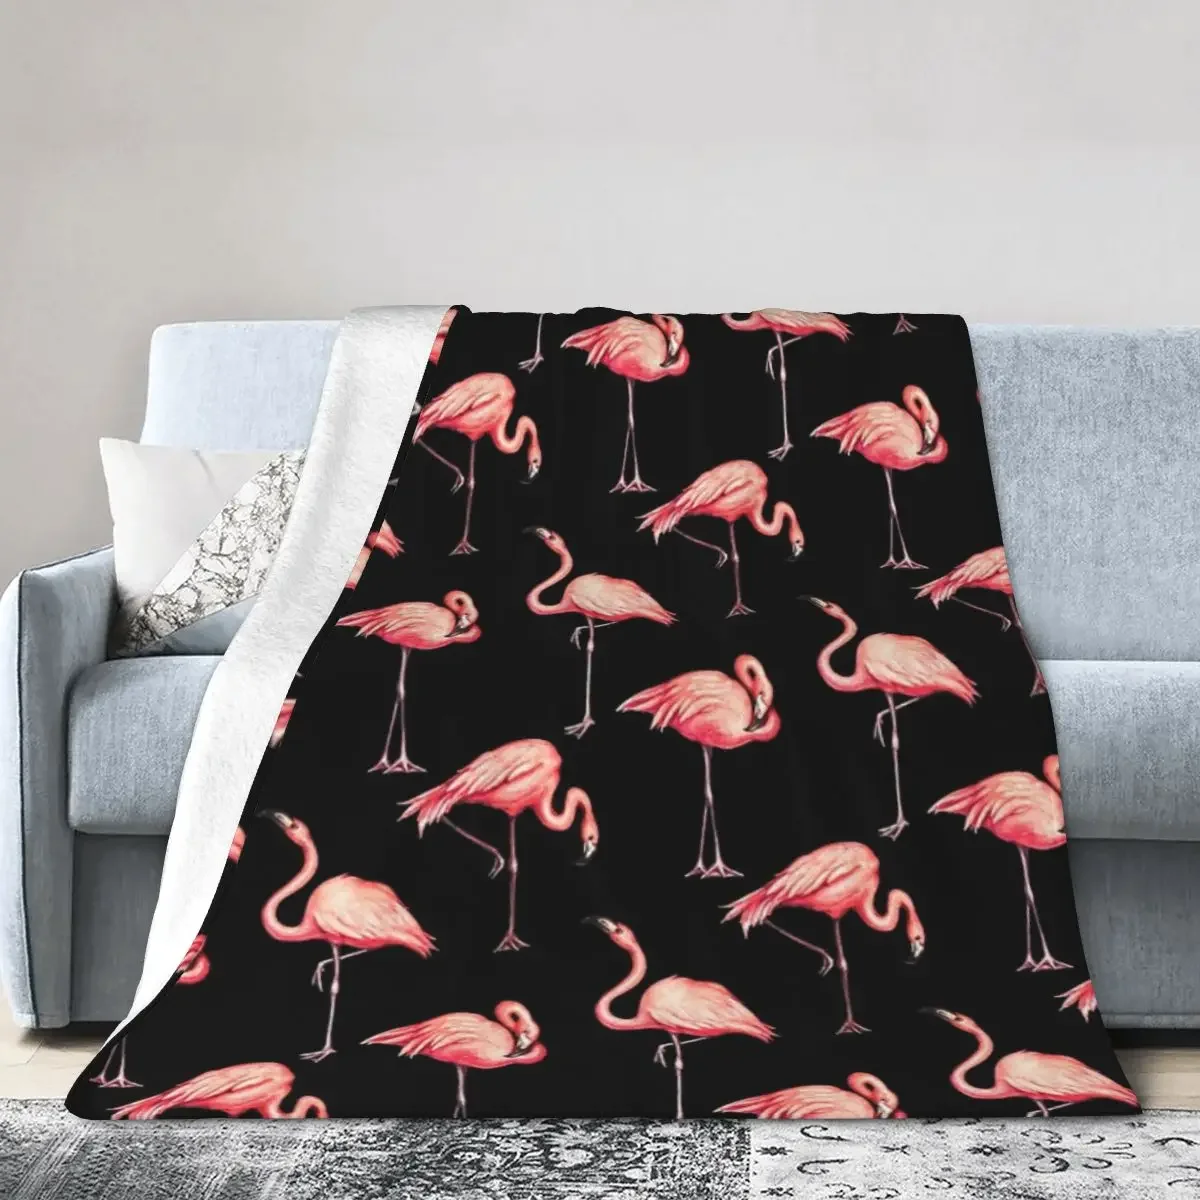 

Flamingo Pattern - Black Blankets Soft Warm Flannel Throw Blanket Bedspread for Bed Living room Picnic Travel Home Sofa